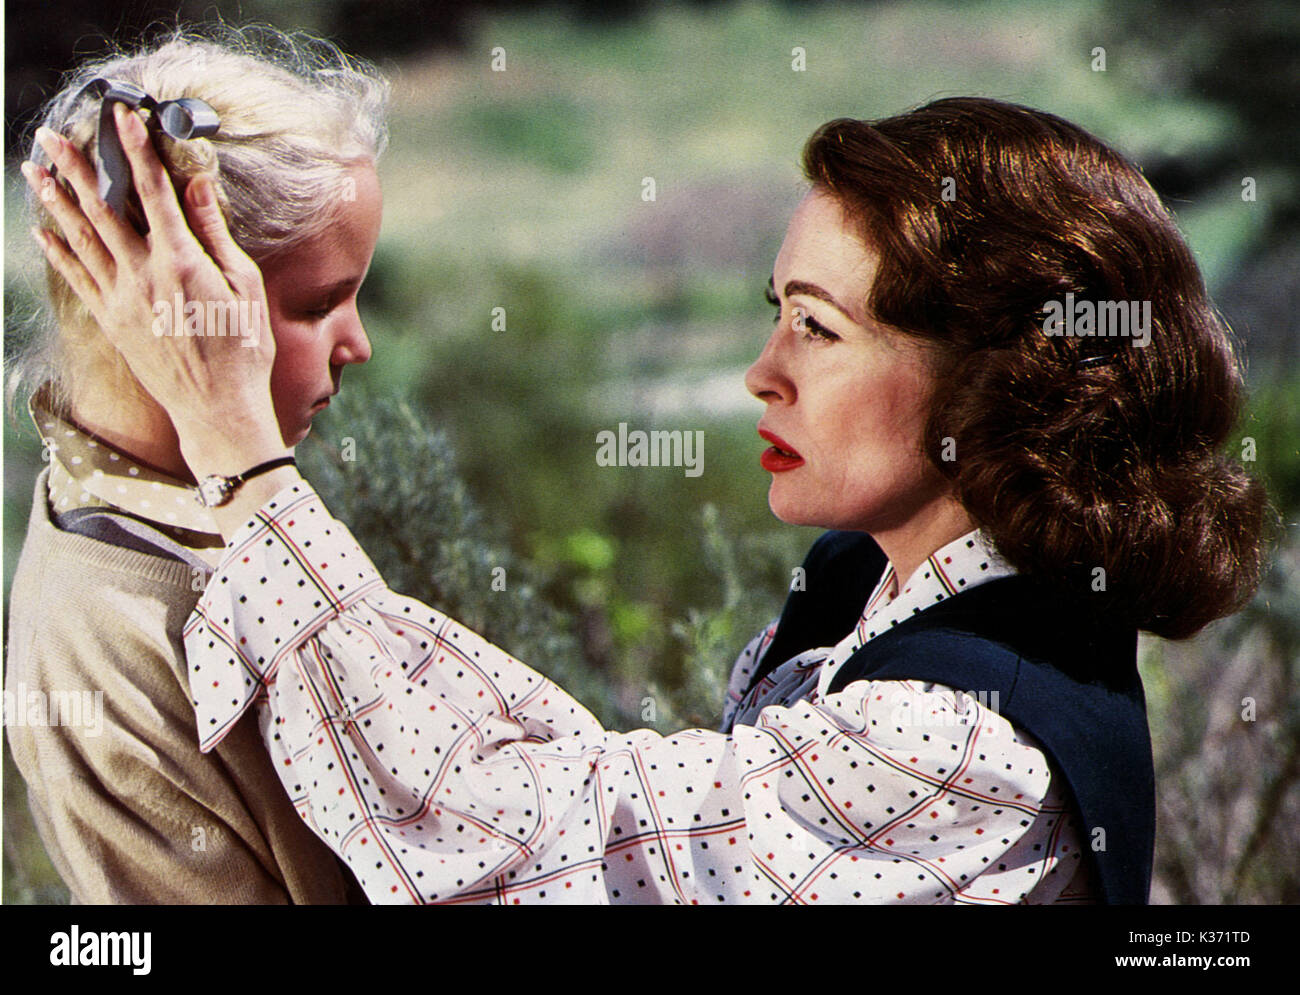 MOMMIE DEAREST Directed by Frank Perry with Mara Hobel as the young Christina Crawford and Faye Dunaway as her adoptive mother, film star Joan Crawford FILM RELEASE BY PARAMOUNT PICTURES     Date: 1981 Stock Photo